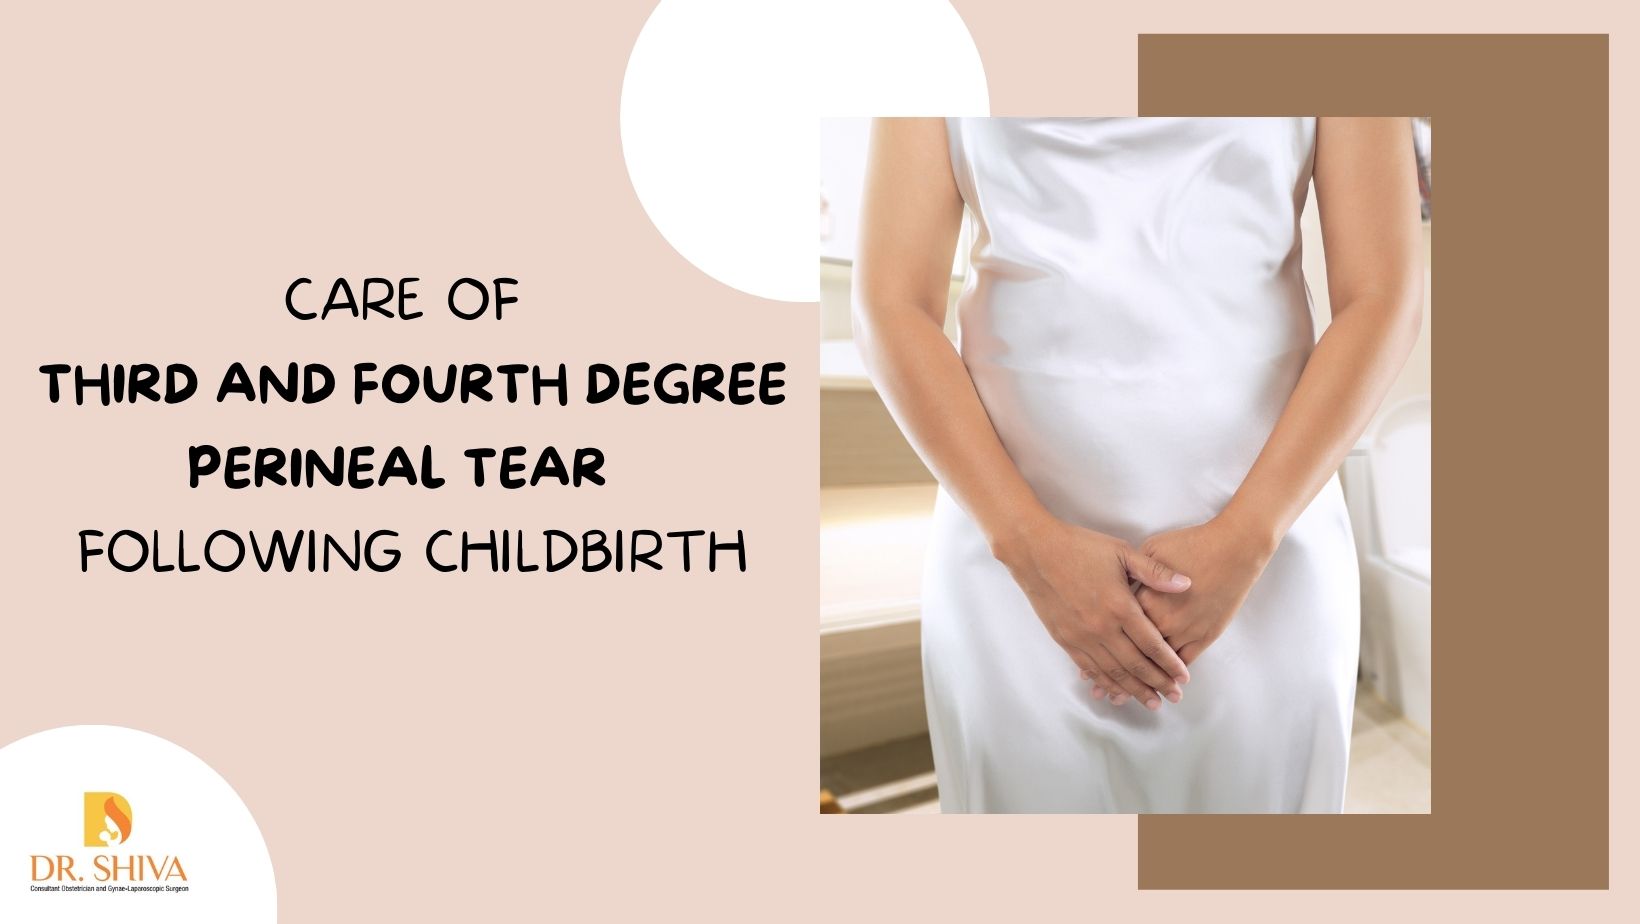 Care of Third and Fourth degree perineal tear